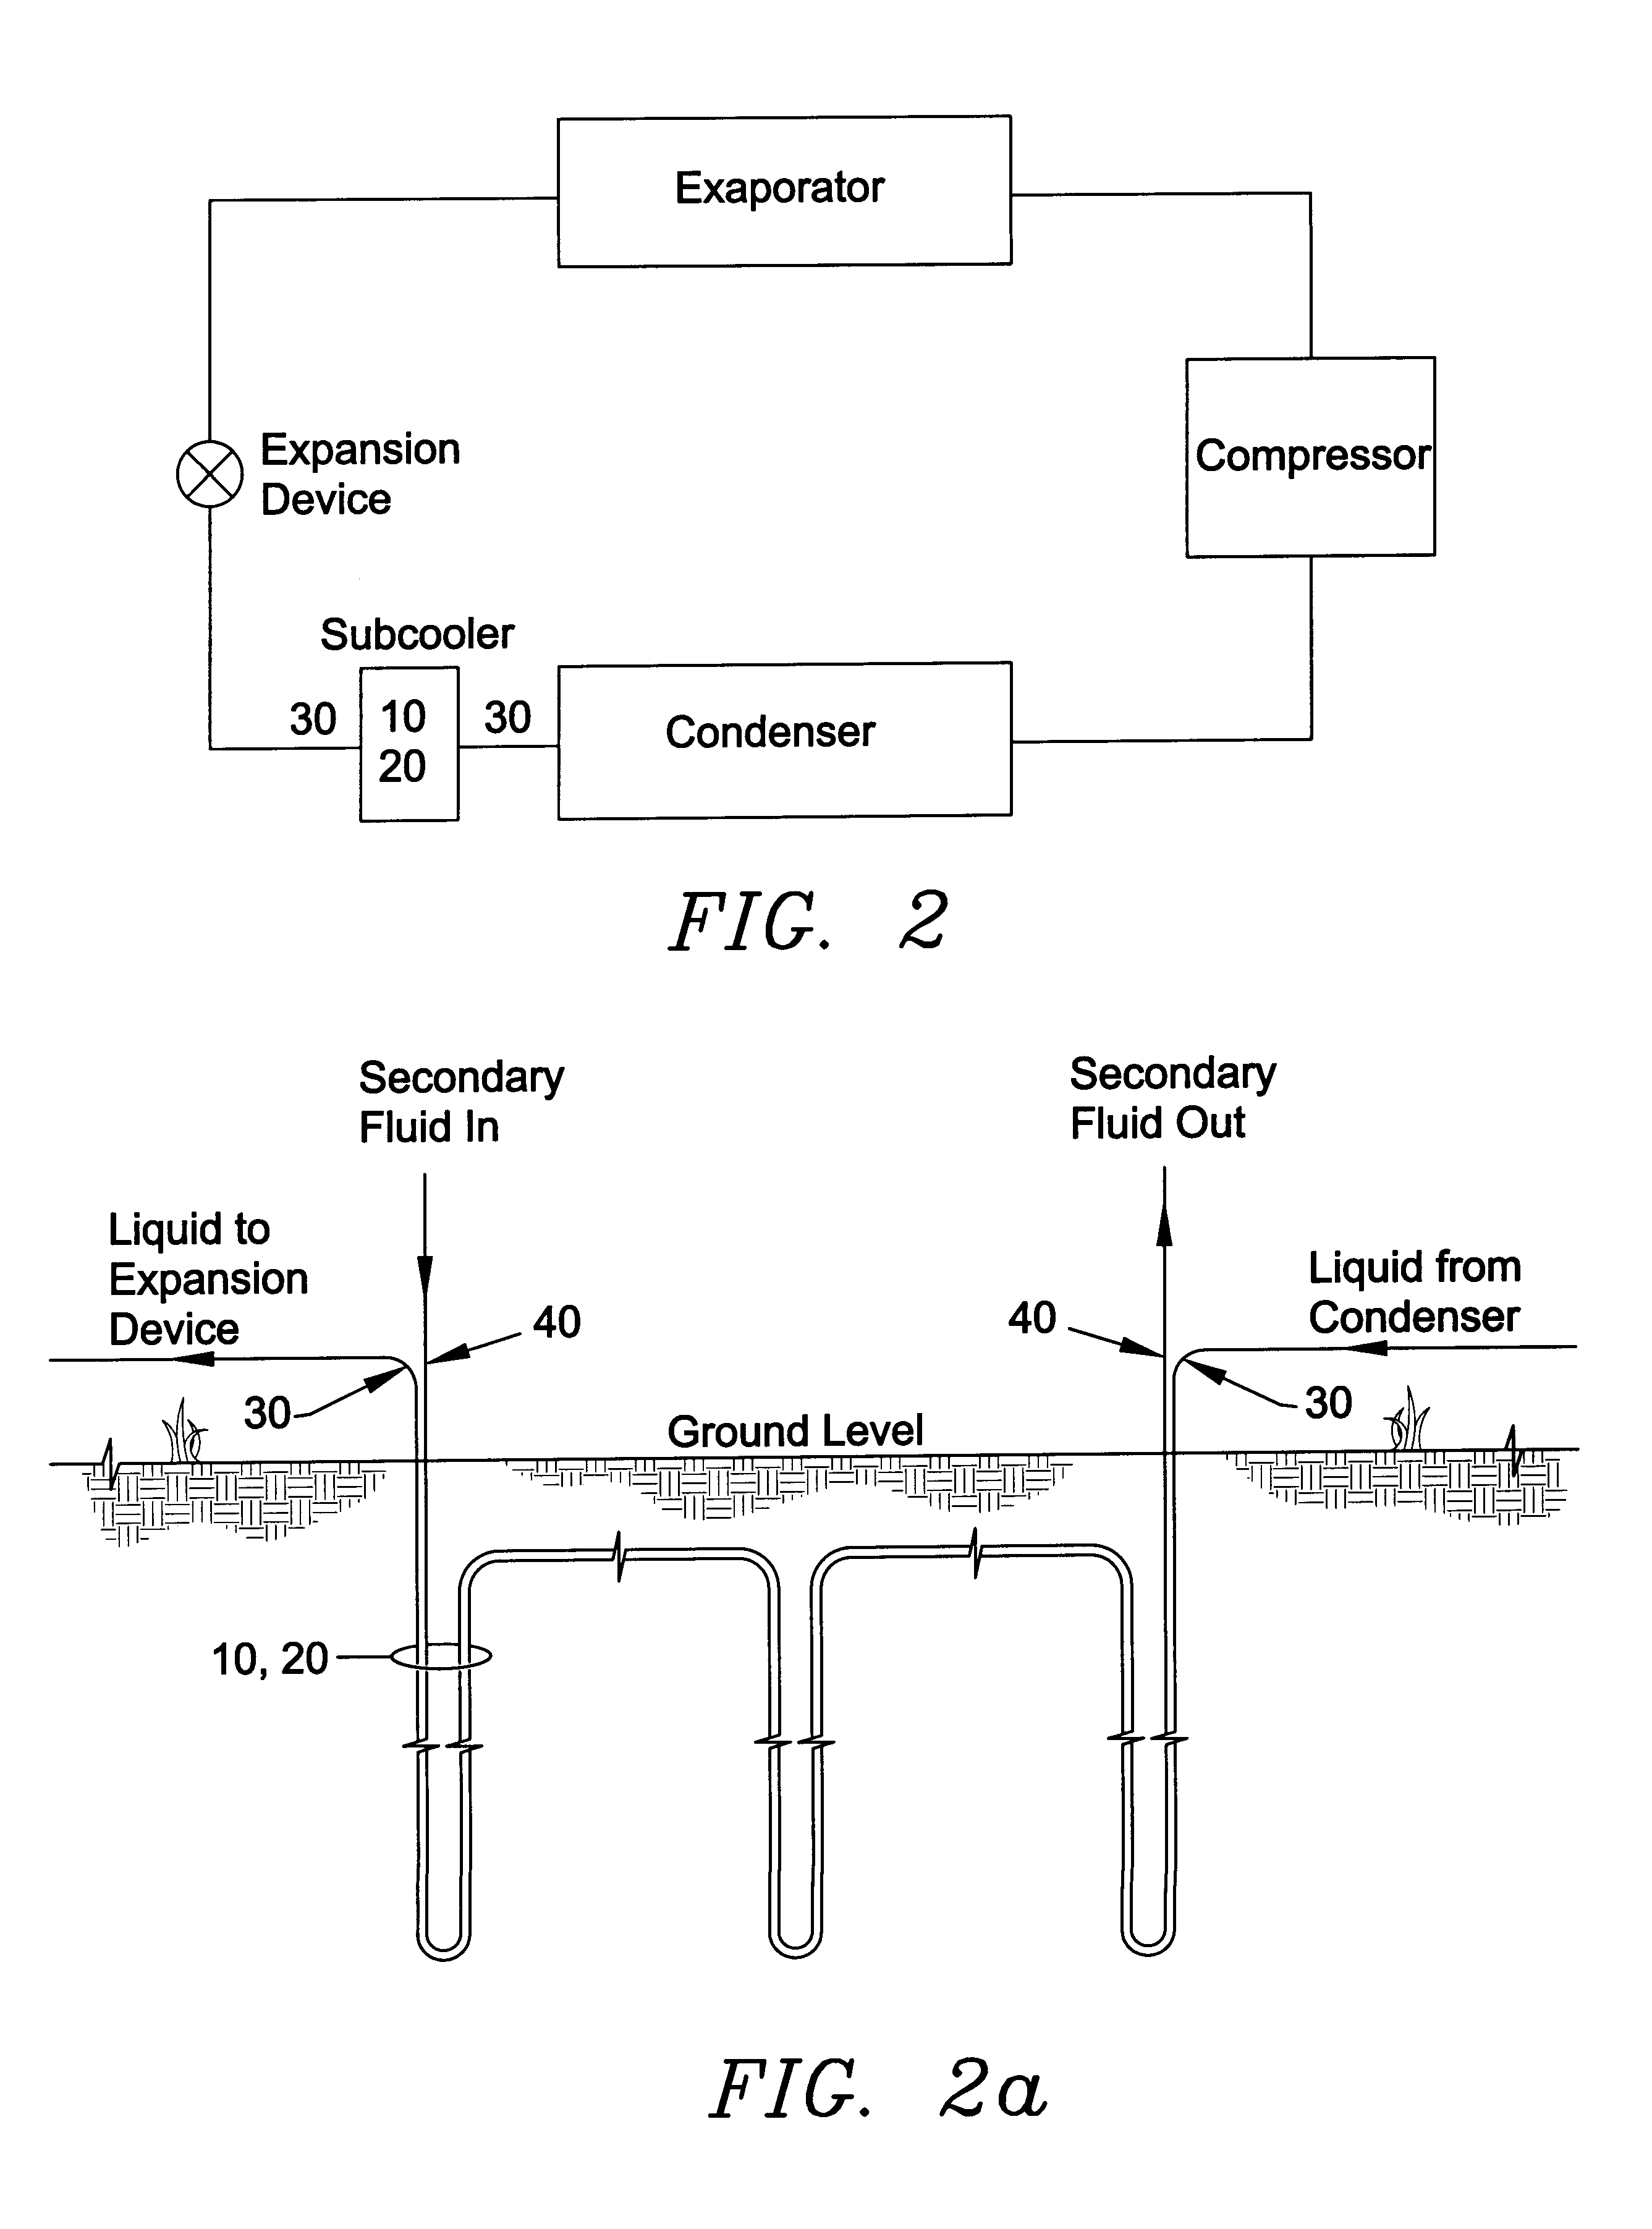 Direct refrigerant geothermal heat exchange or multiple source subcool/postheat/precool system therefor